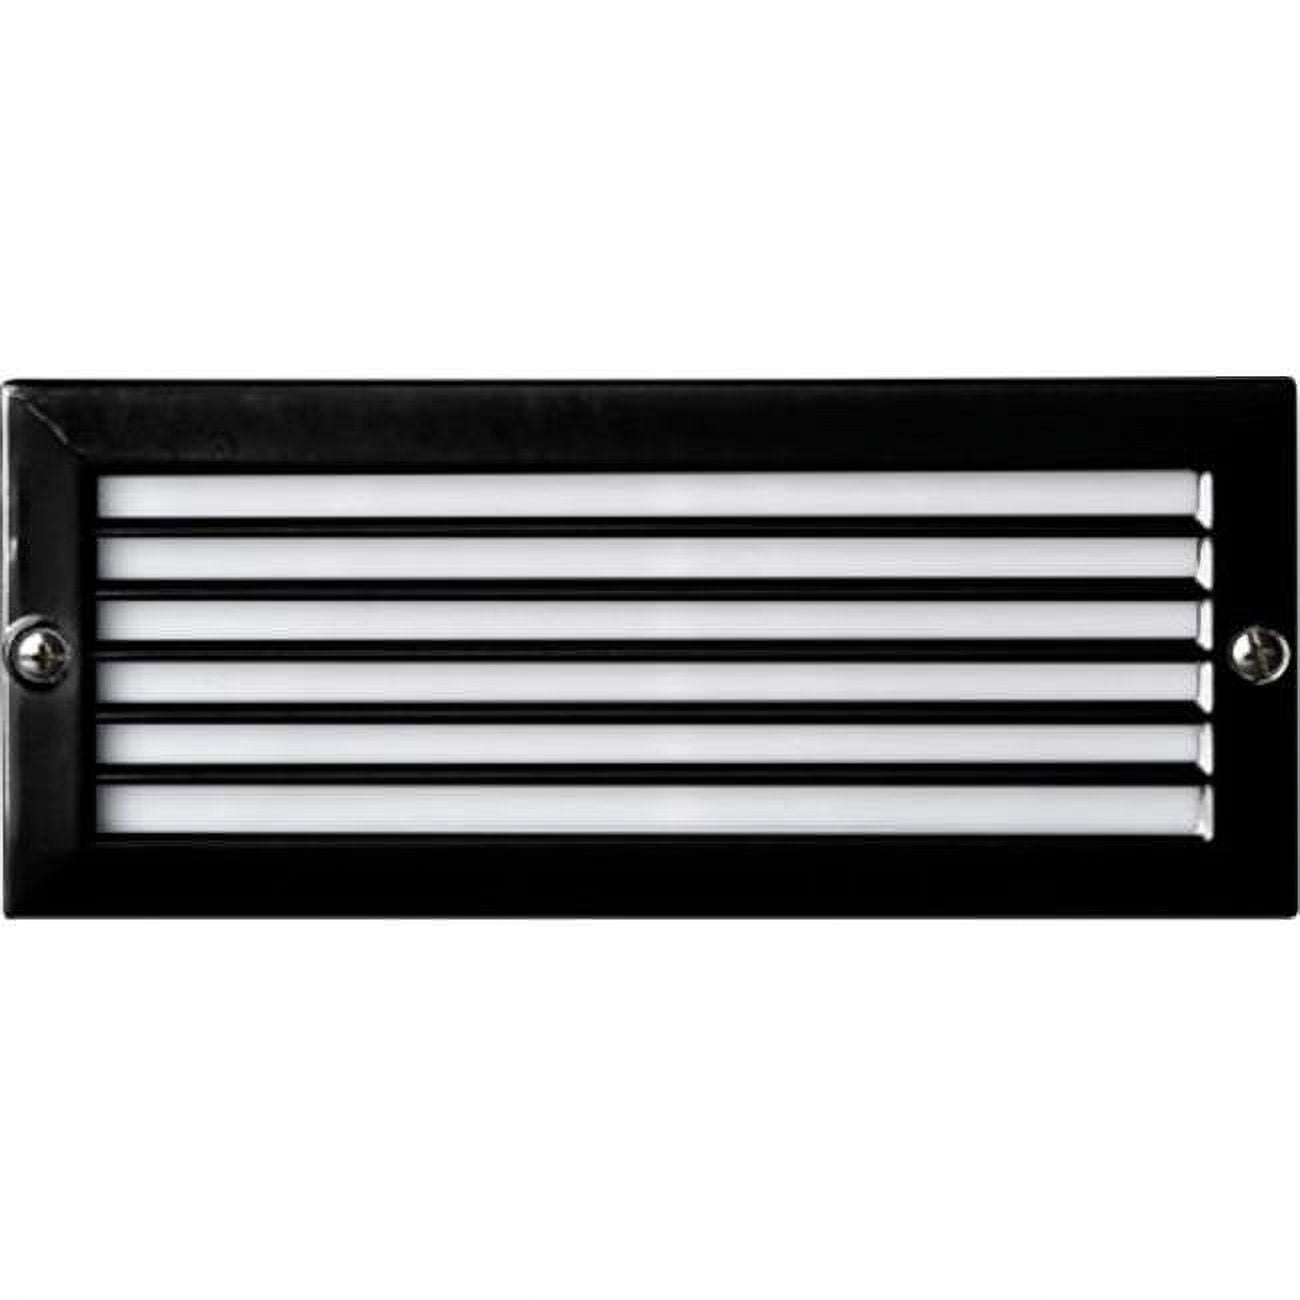 Picture of Dabmar Lighting LV601-B Cast Aluminum Recessed Louvered Brick, Step & Wall Light, Black - 4 x 9.13 x 3.25 in.